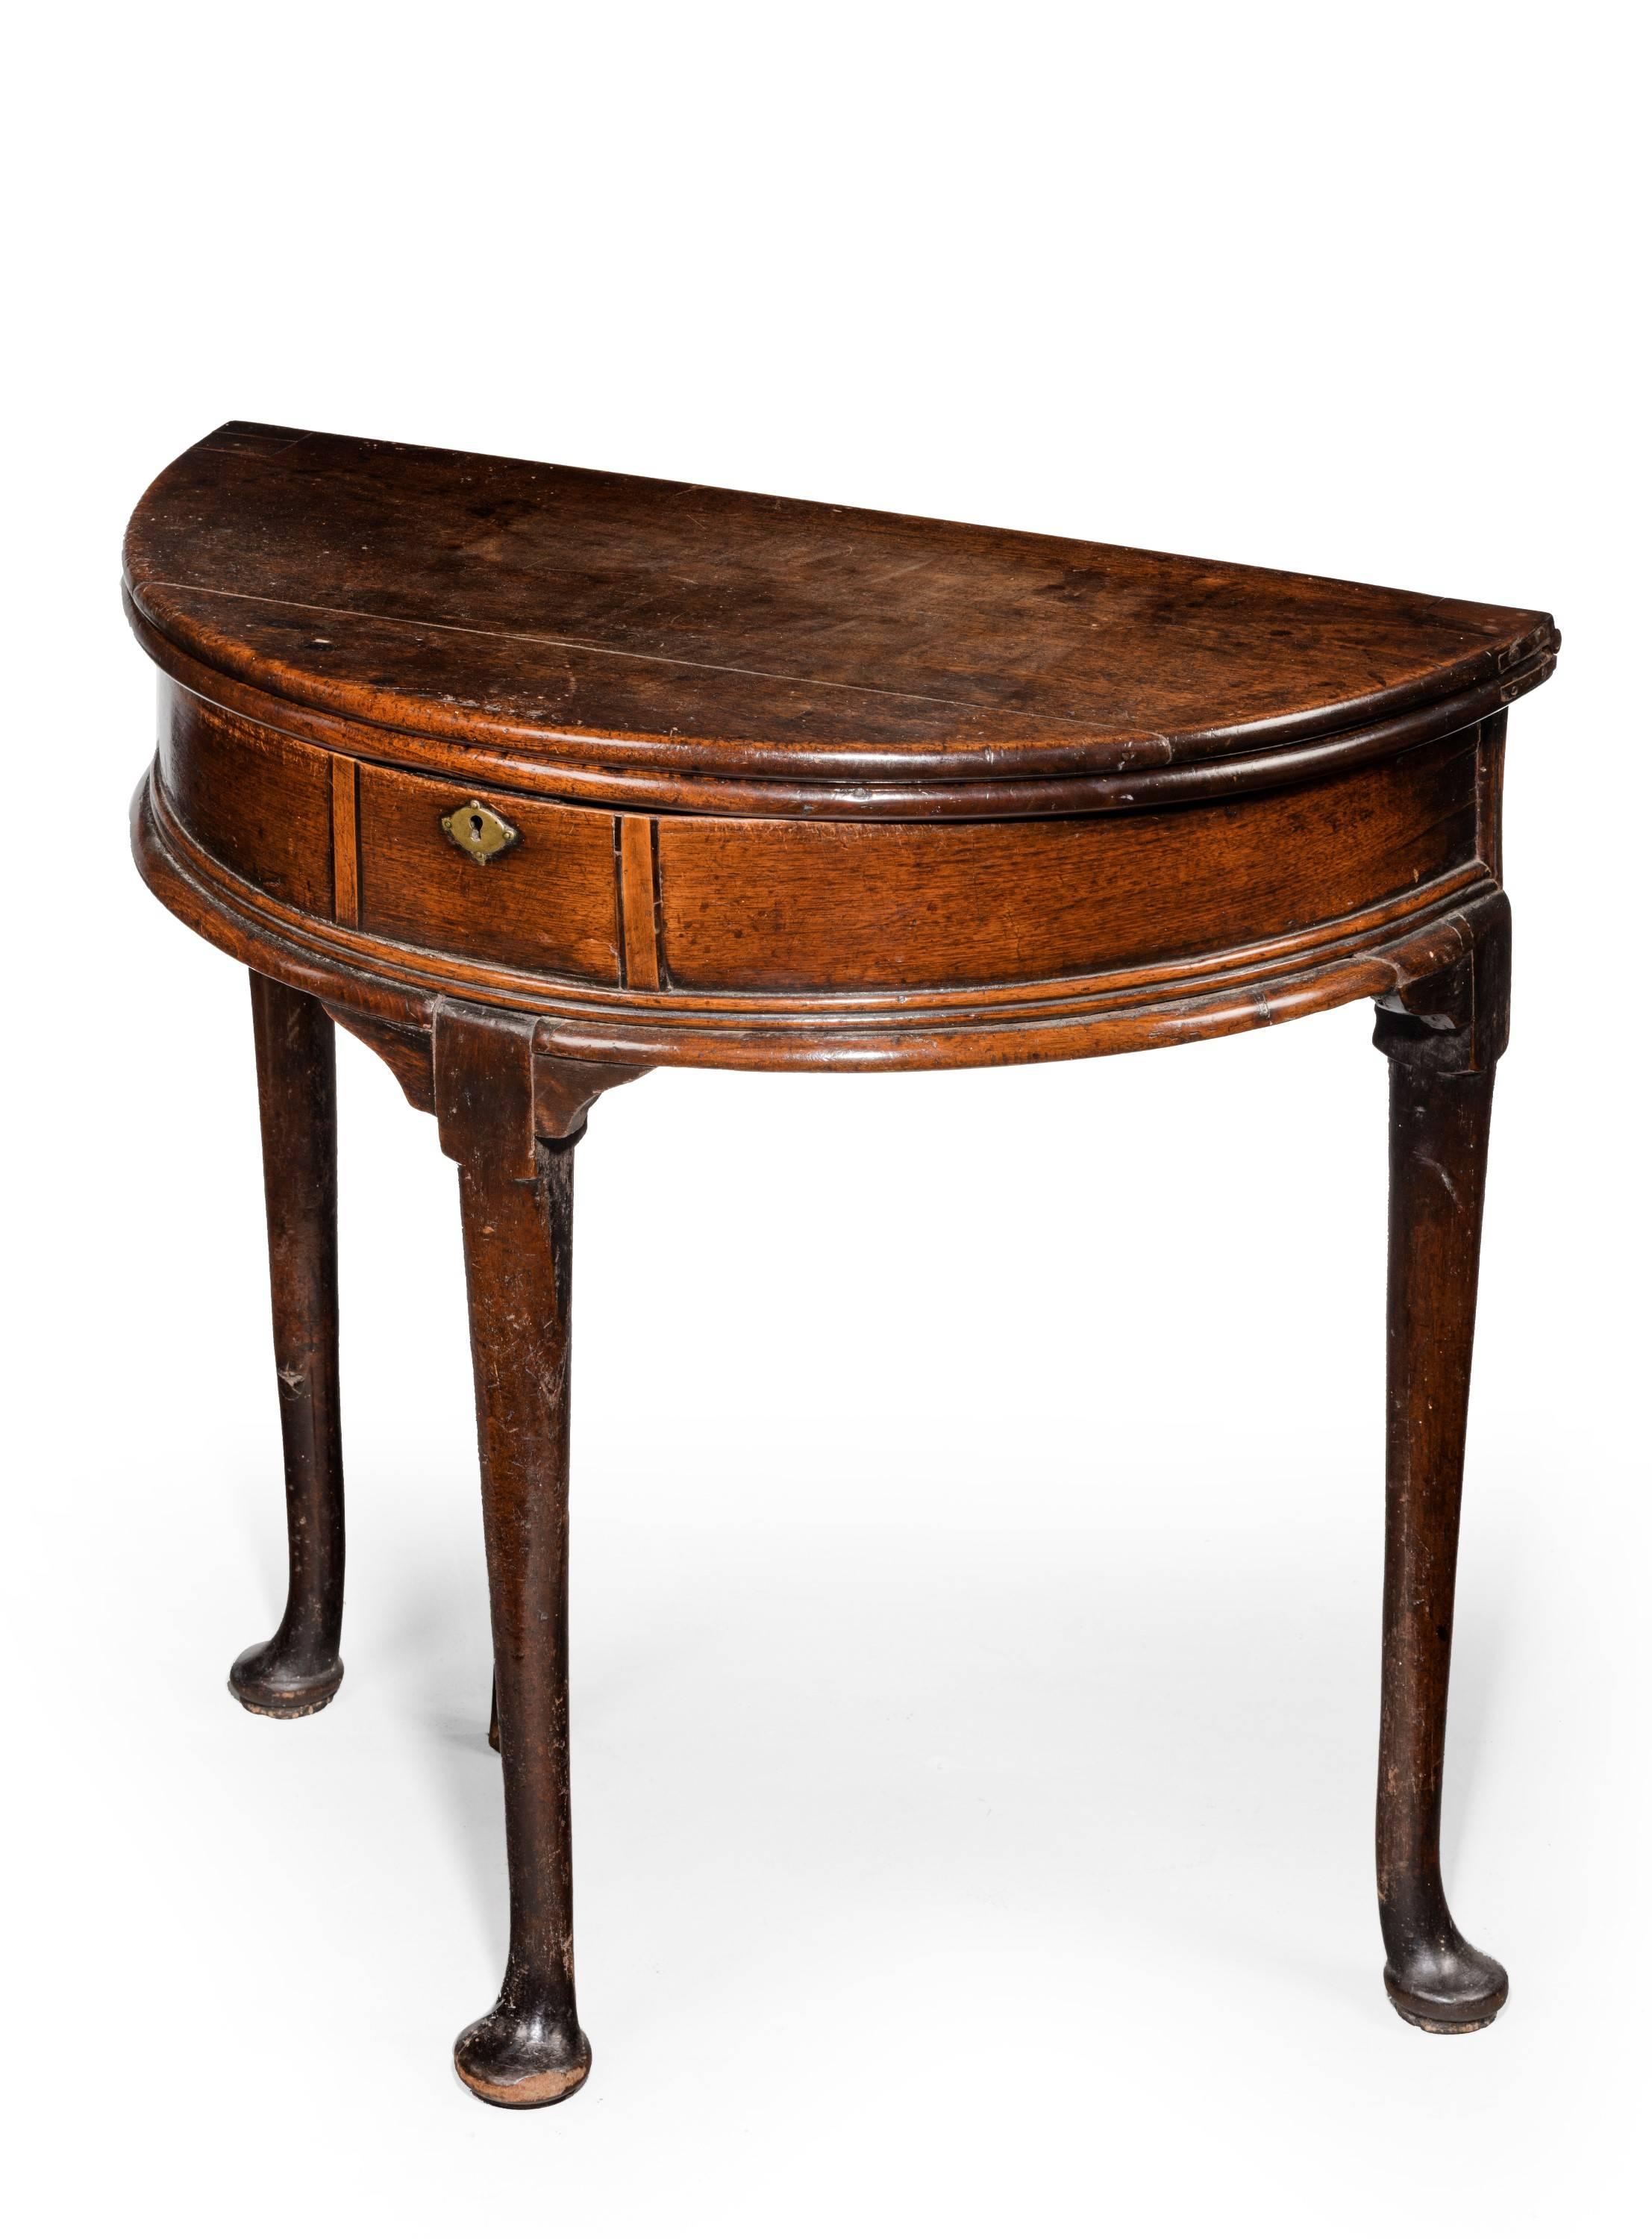 English Queen Anne Walnut Demilune Turn Over Table